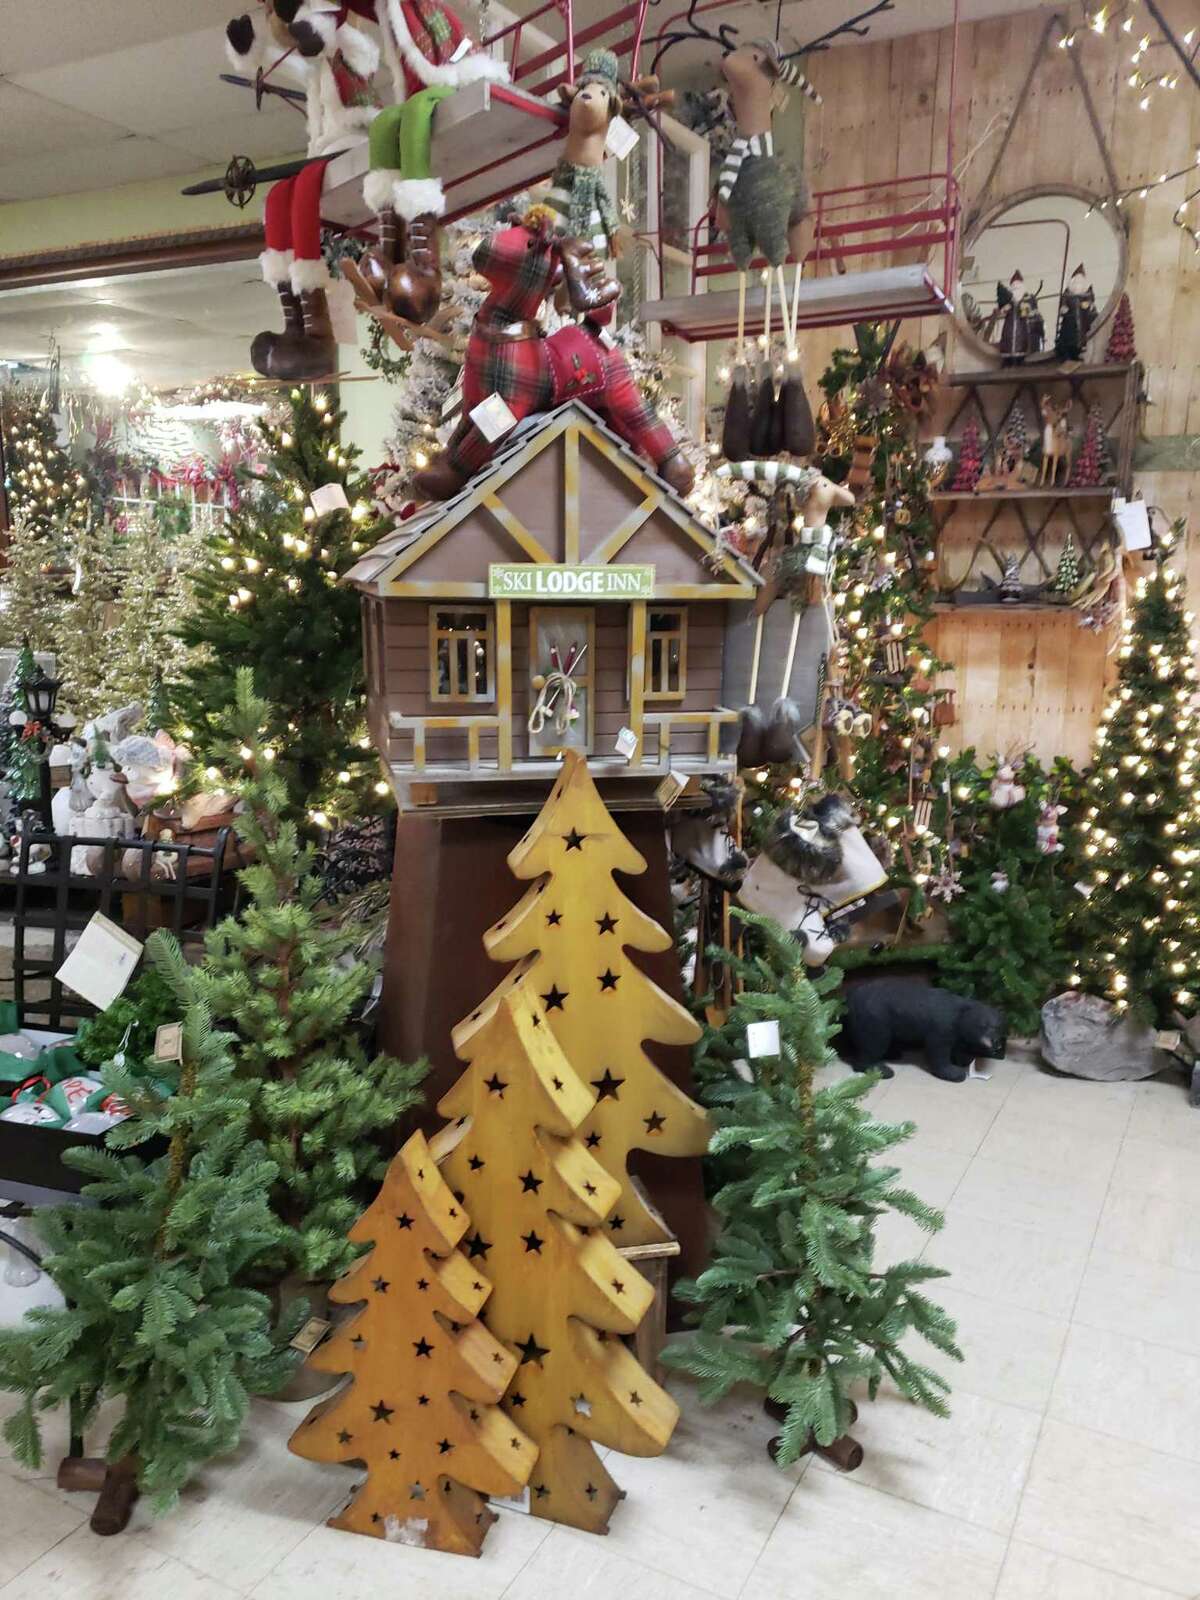 Rustic looking trees from Hollandia Nurseries in Bethel would dress up virtually any house for the holiday season.